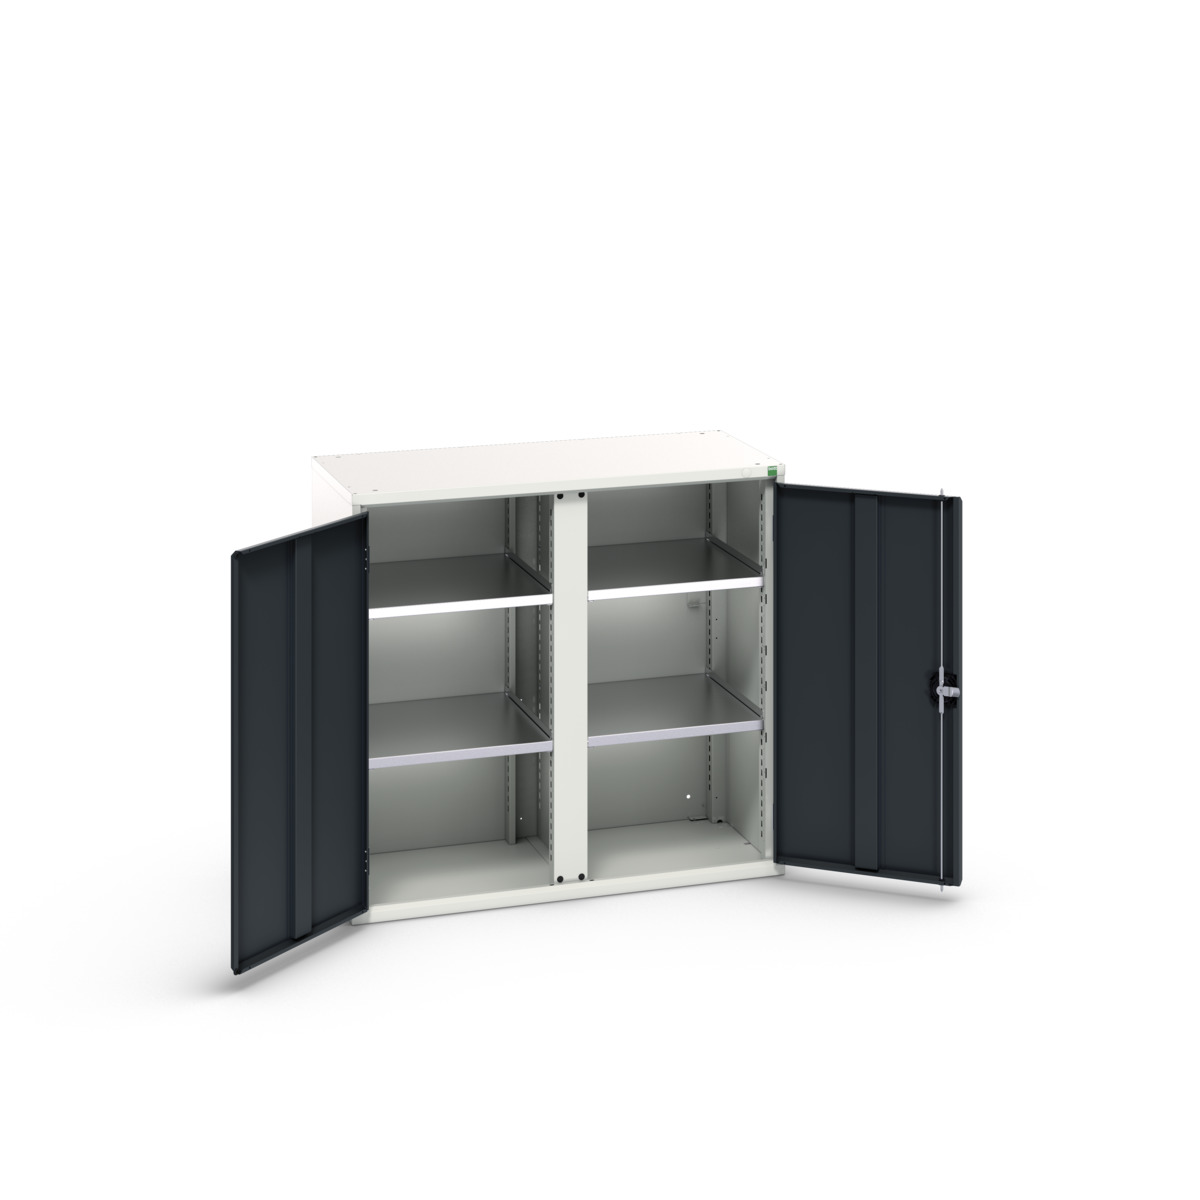 16926555. - verso kitted cupboard